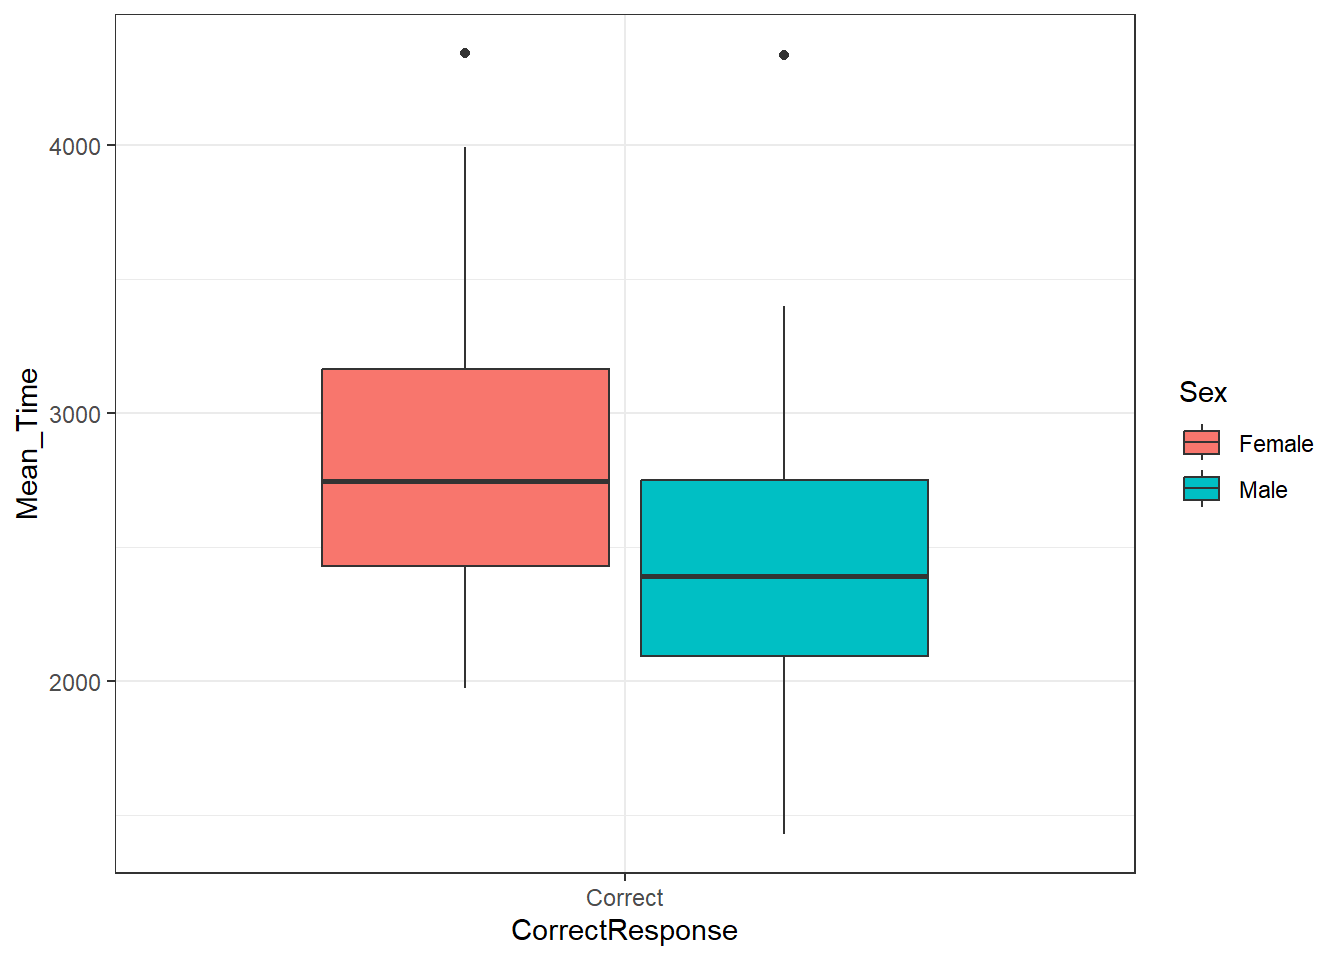 A boxplot of the spreads of Mean Time for Correct Responses by Sex